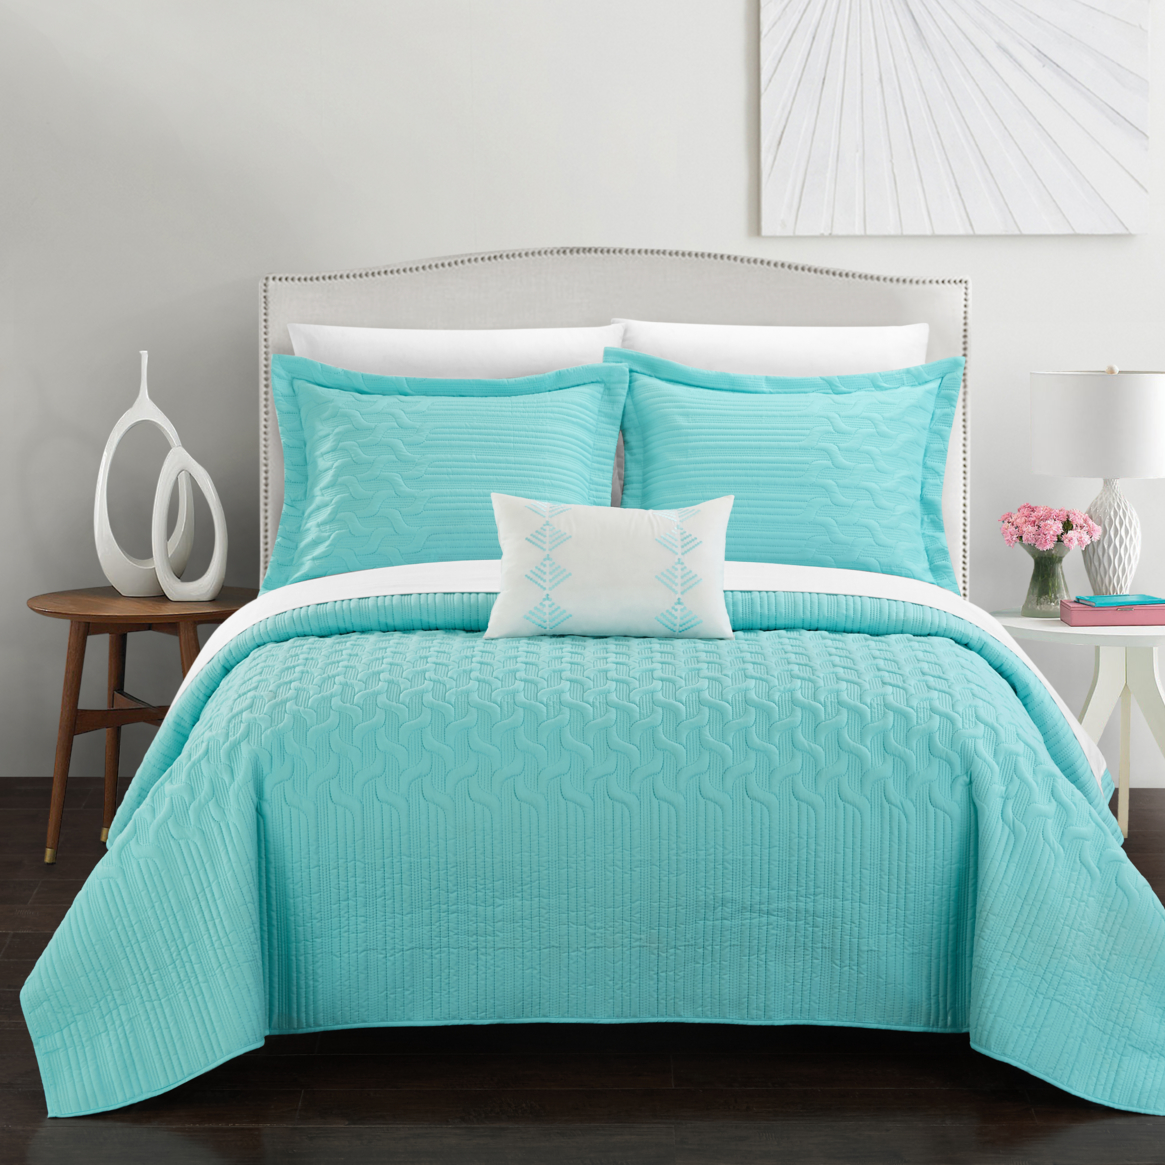 Shaliya 8 Or 6 Piece Quilt Cover Set Interlaced Vine Pattern Quilted Bed In A Bag - Aqua, Queen